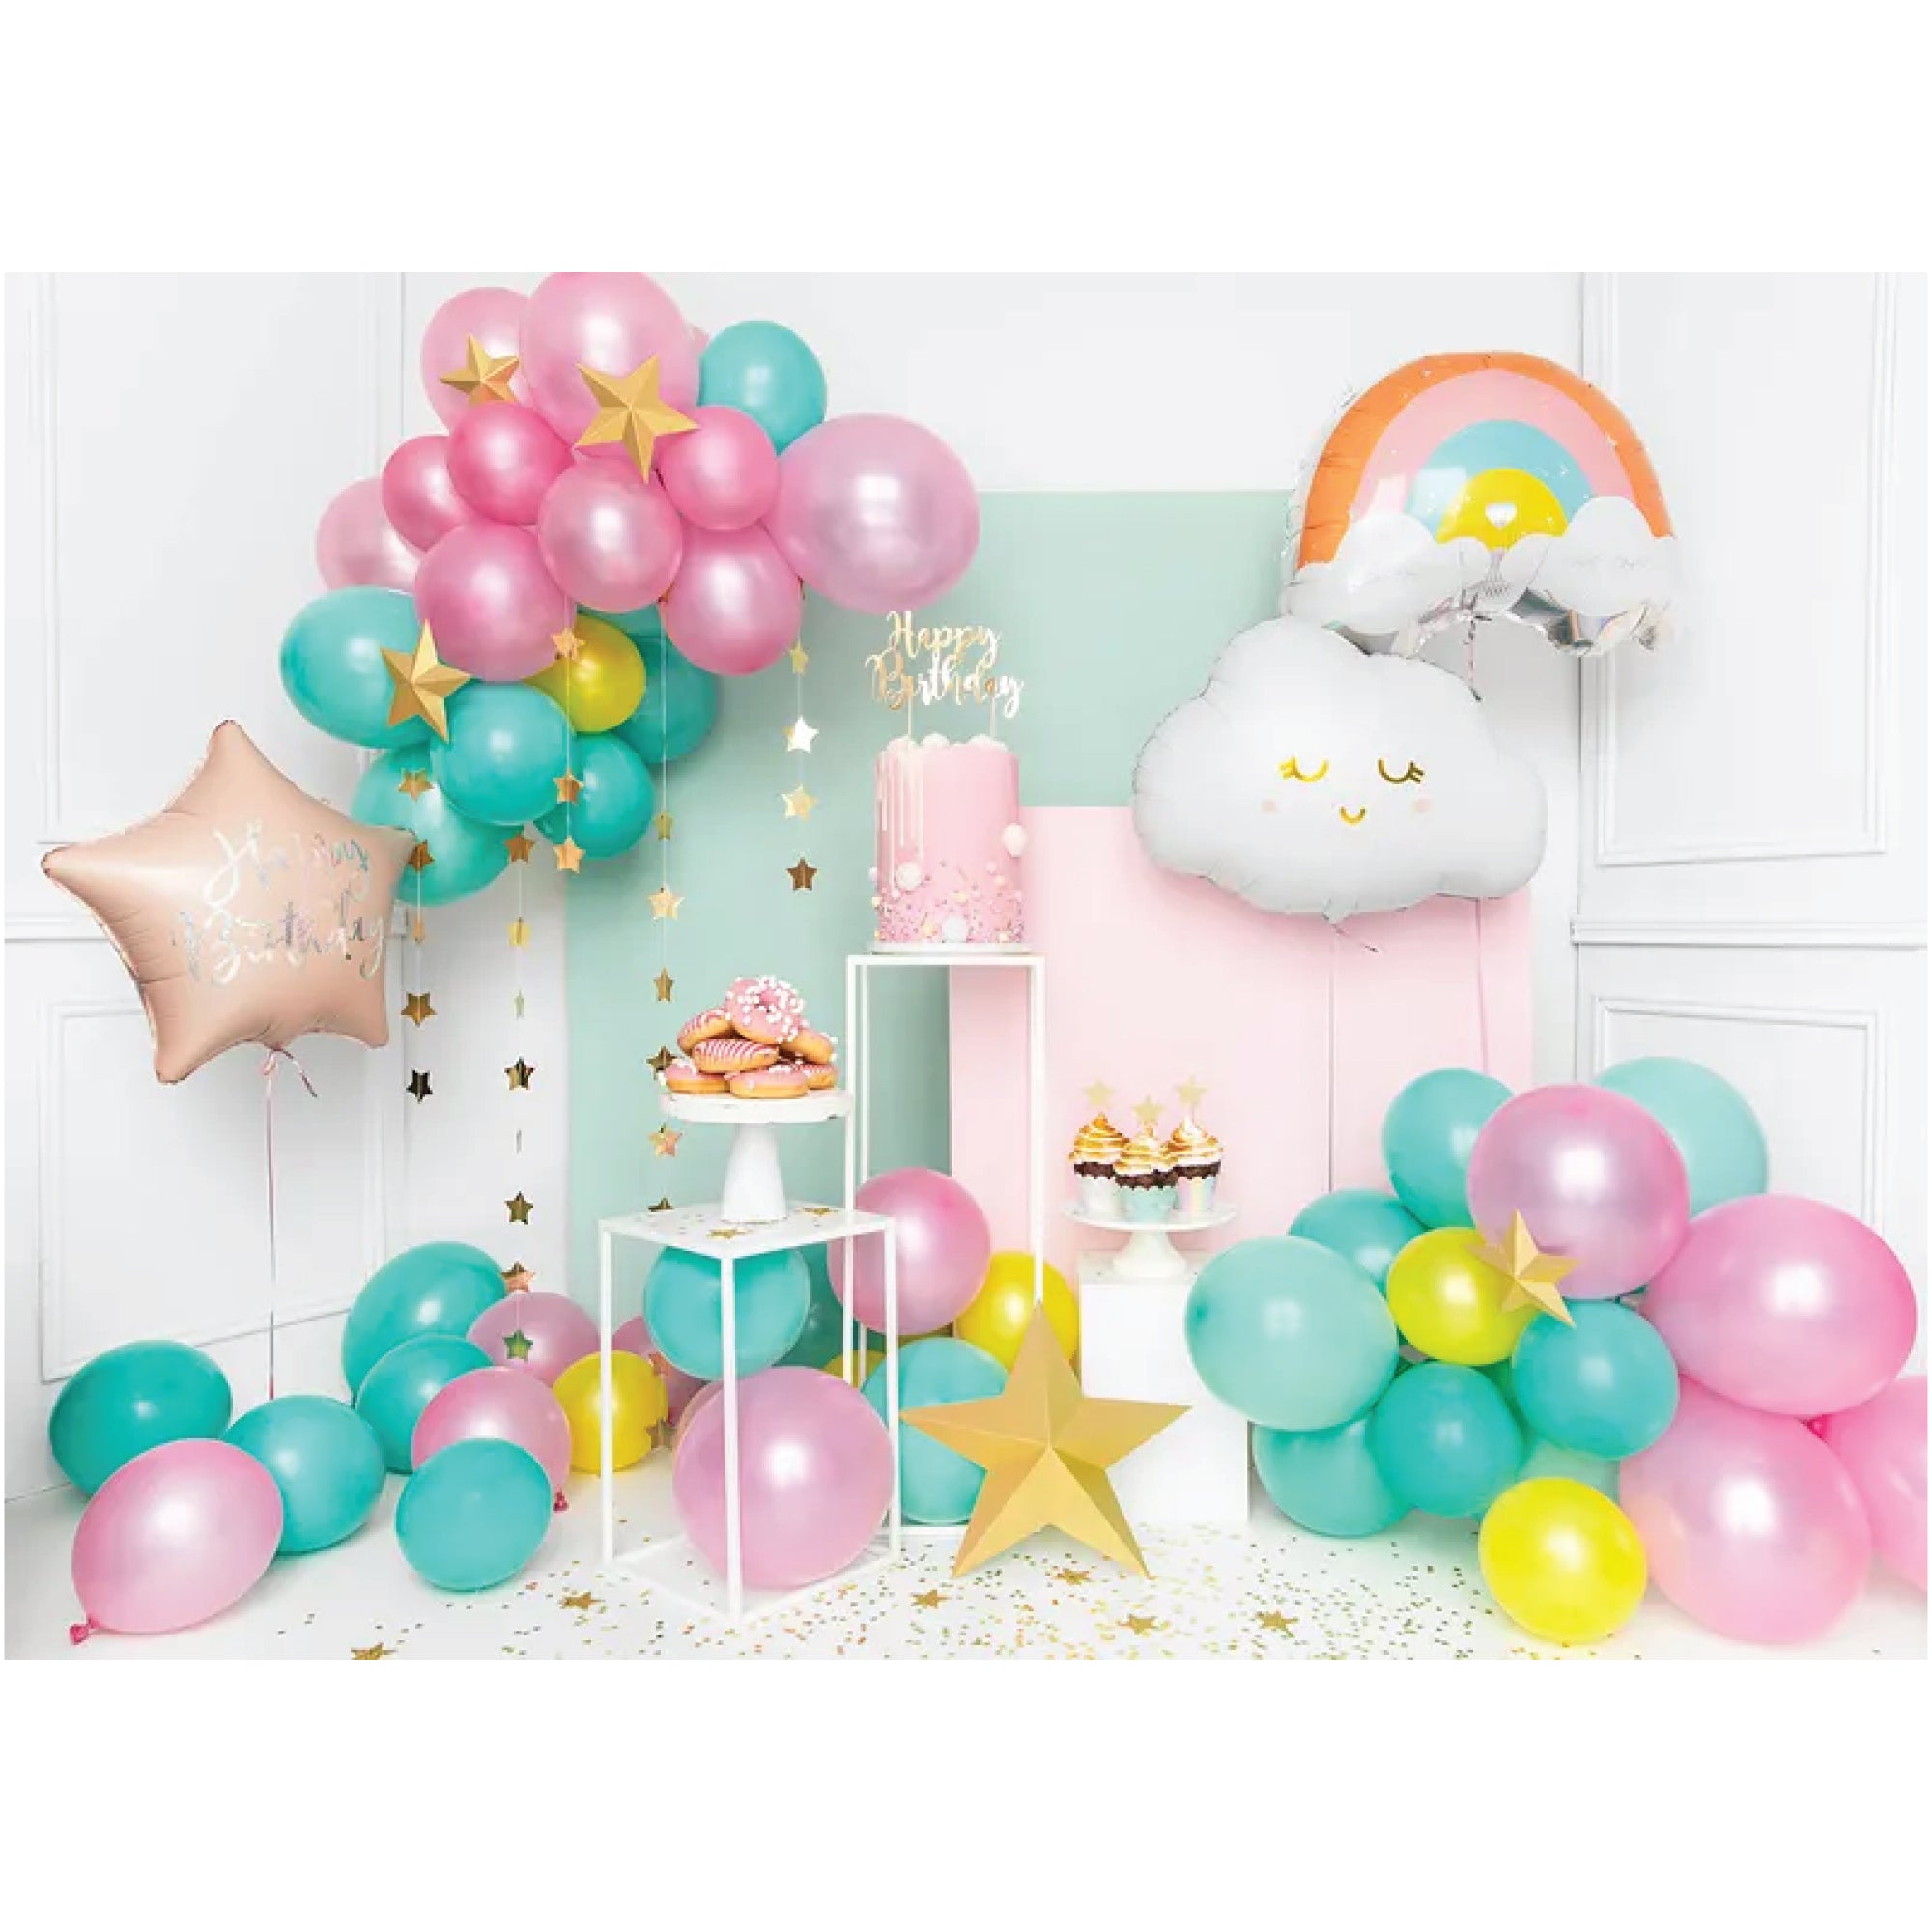 Blush Pink Happy Birthday Star Balloon 15.5in | The Party Darling